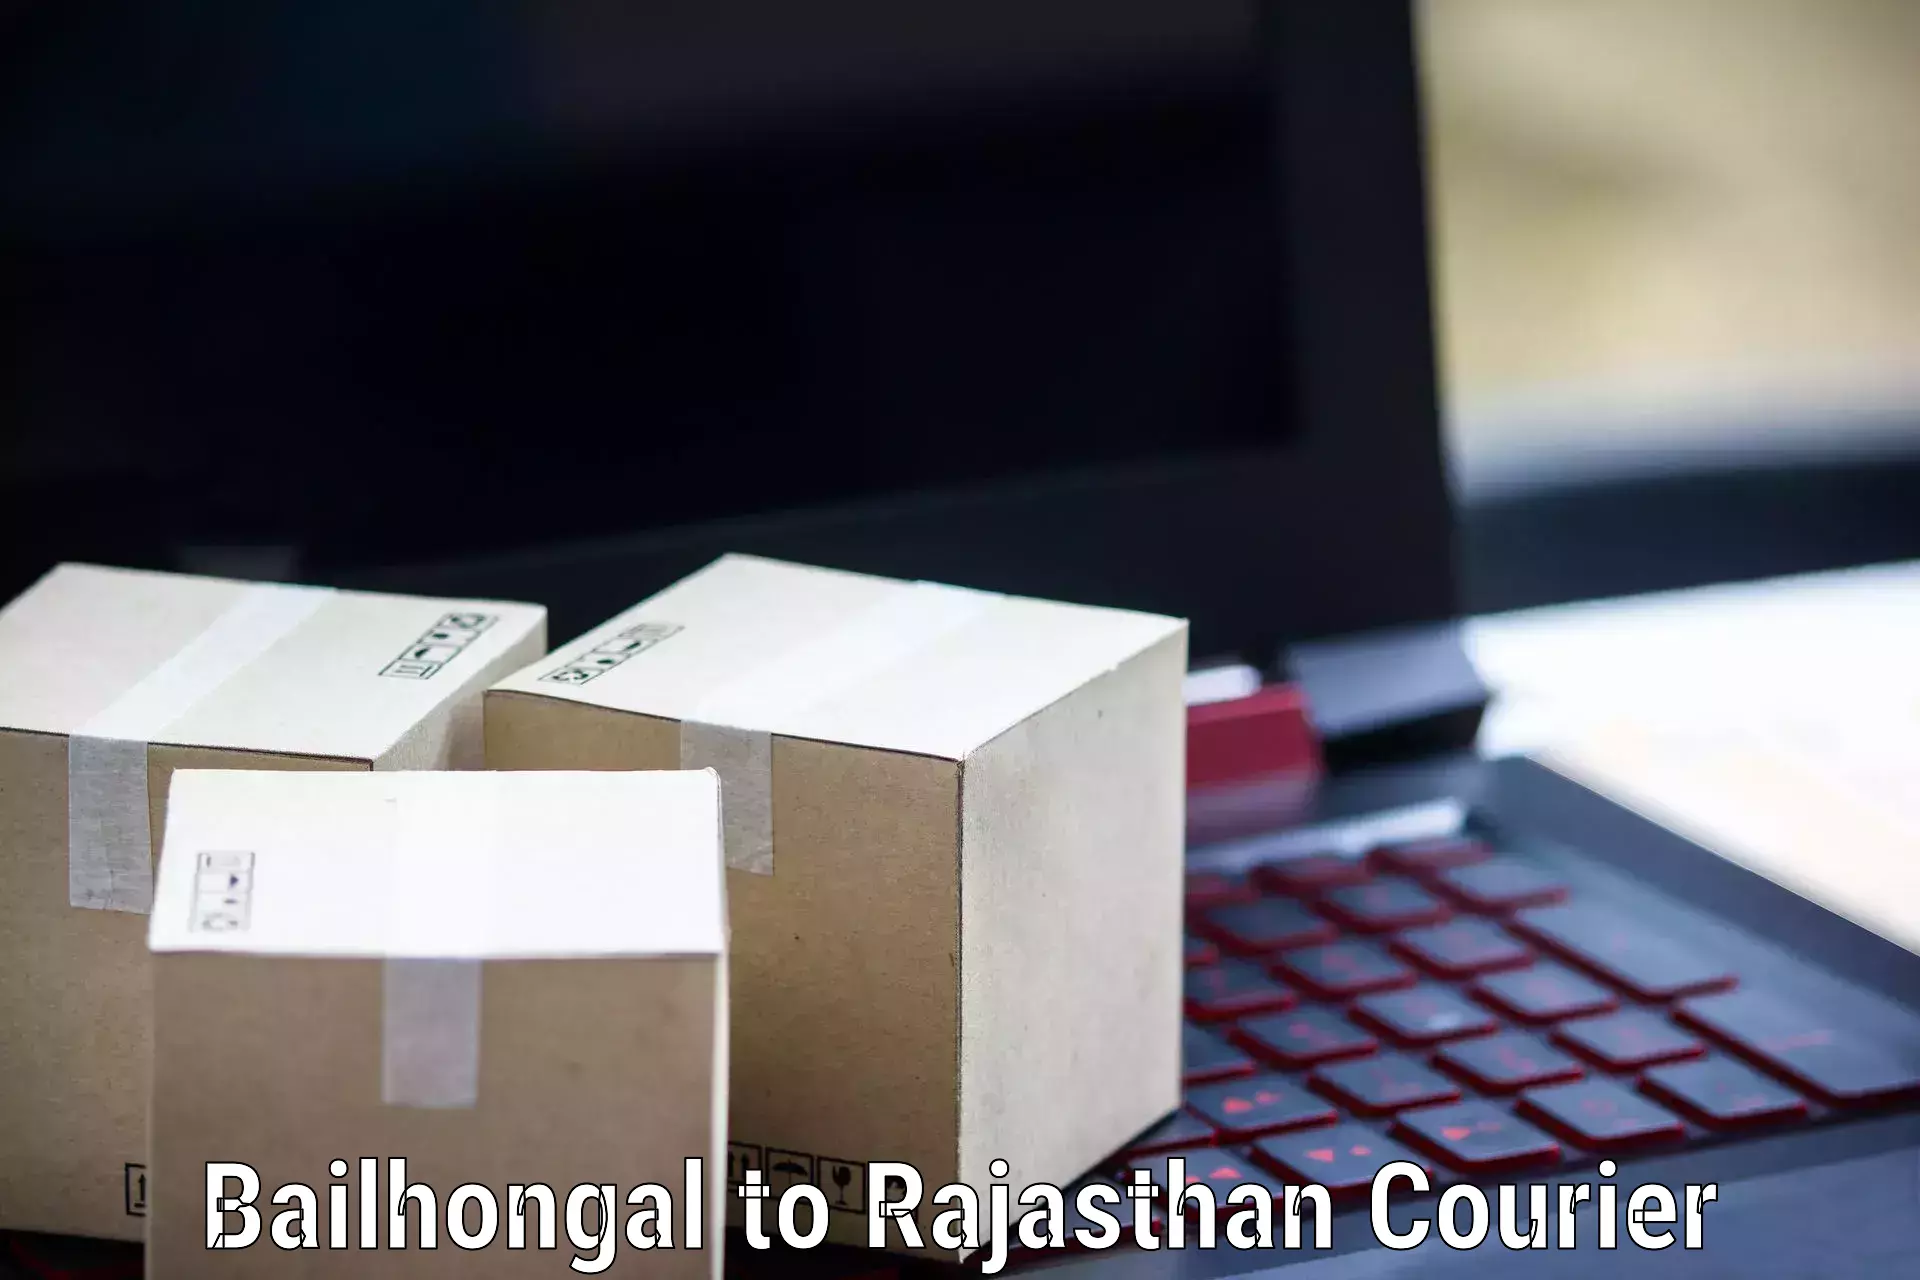 Express delivery capabilities Bailhongal to Kuchaman